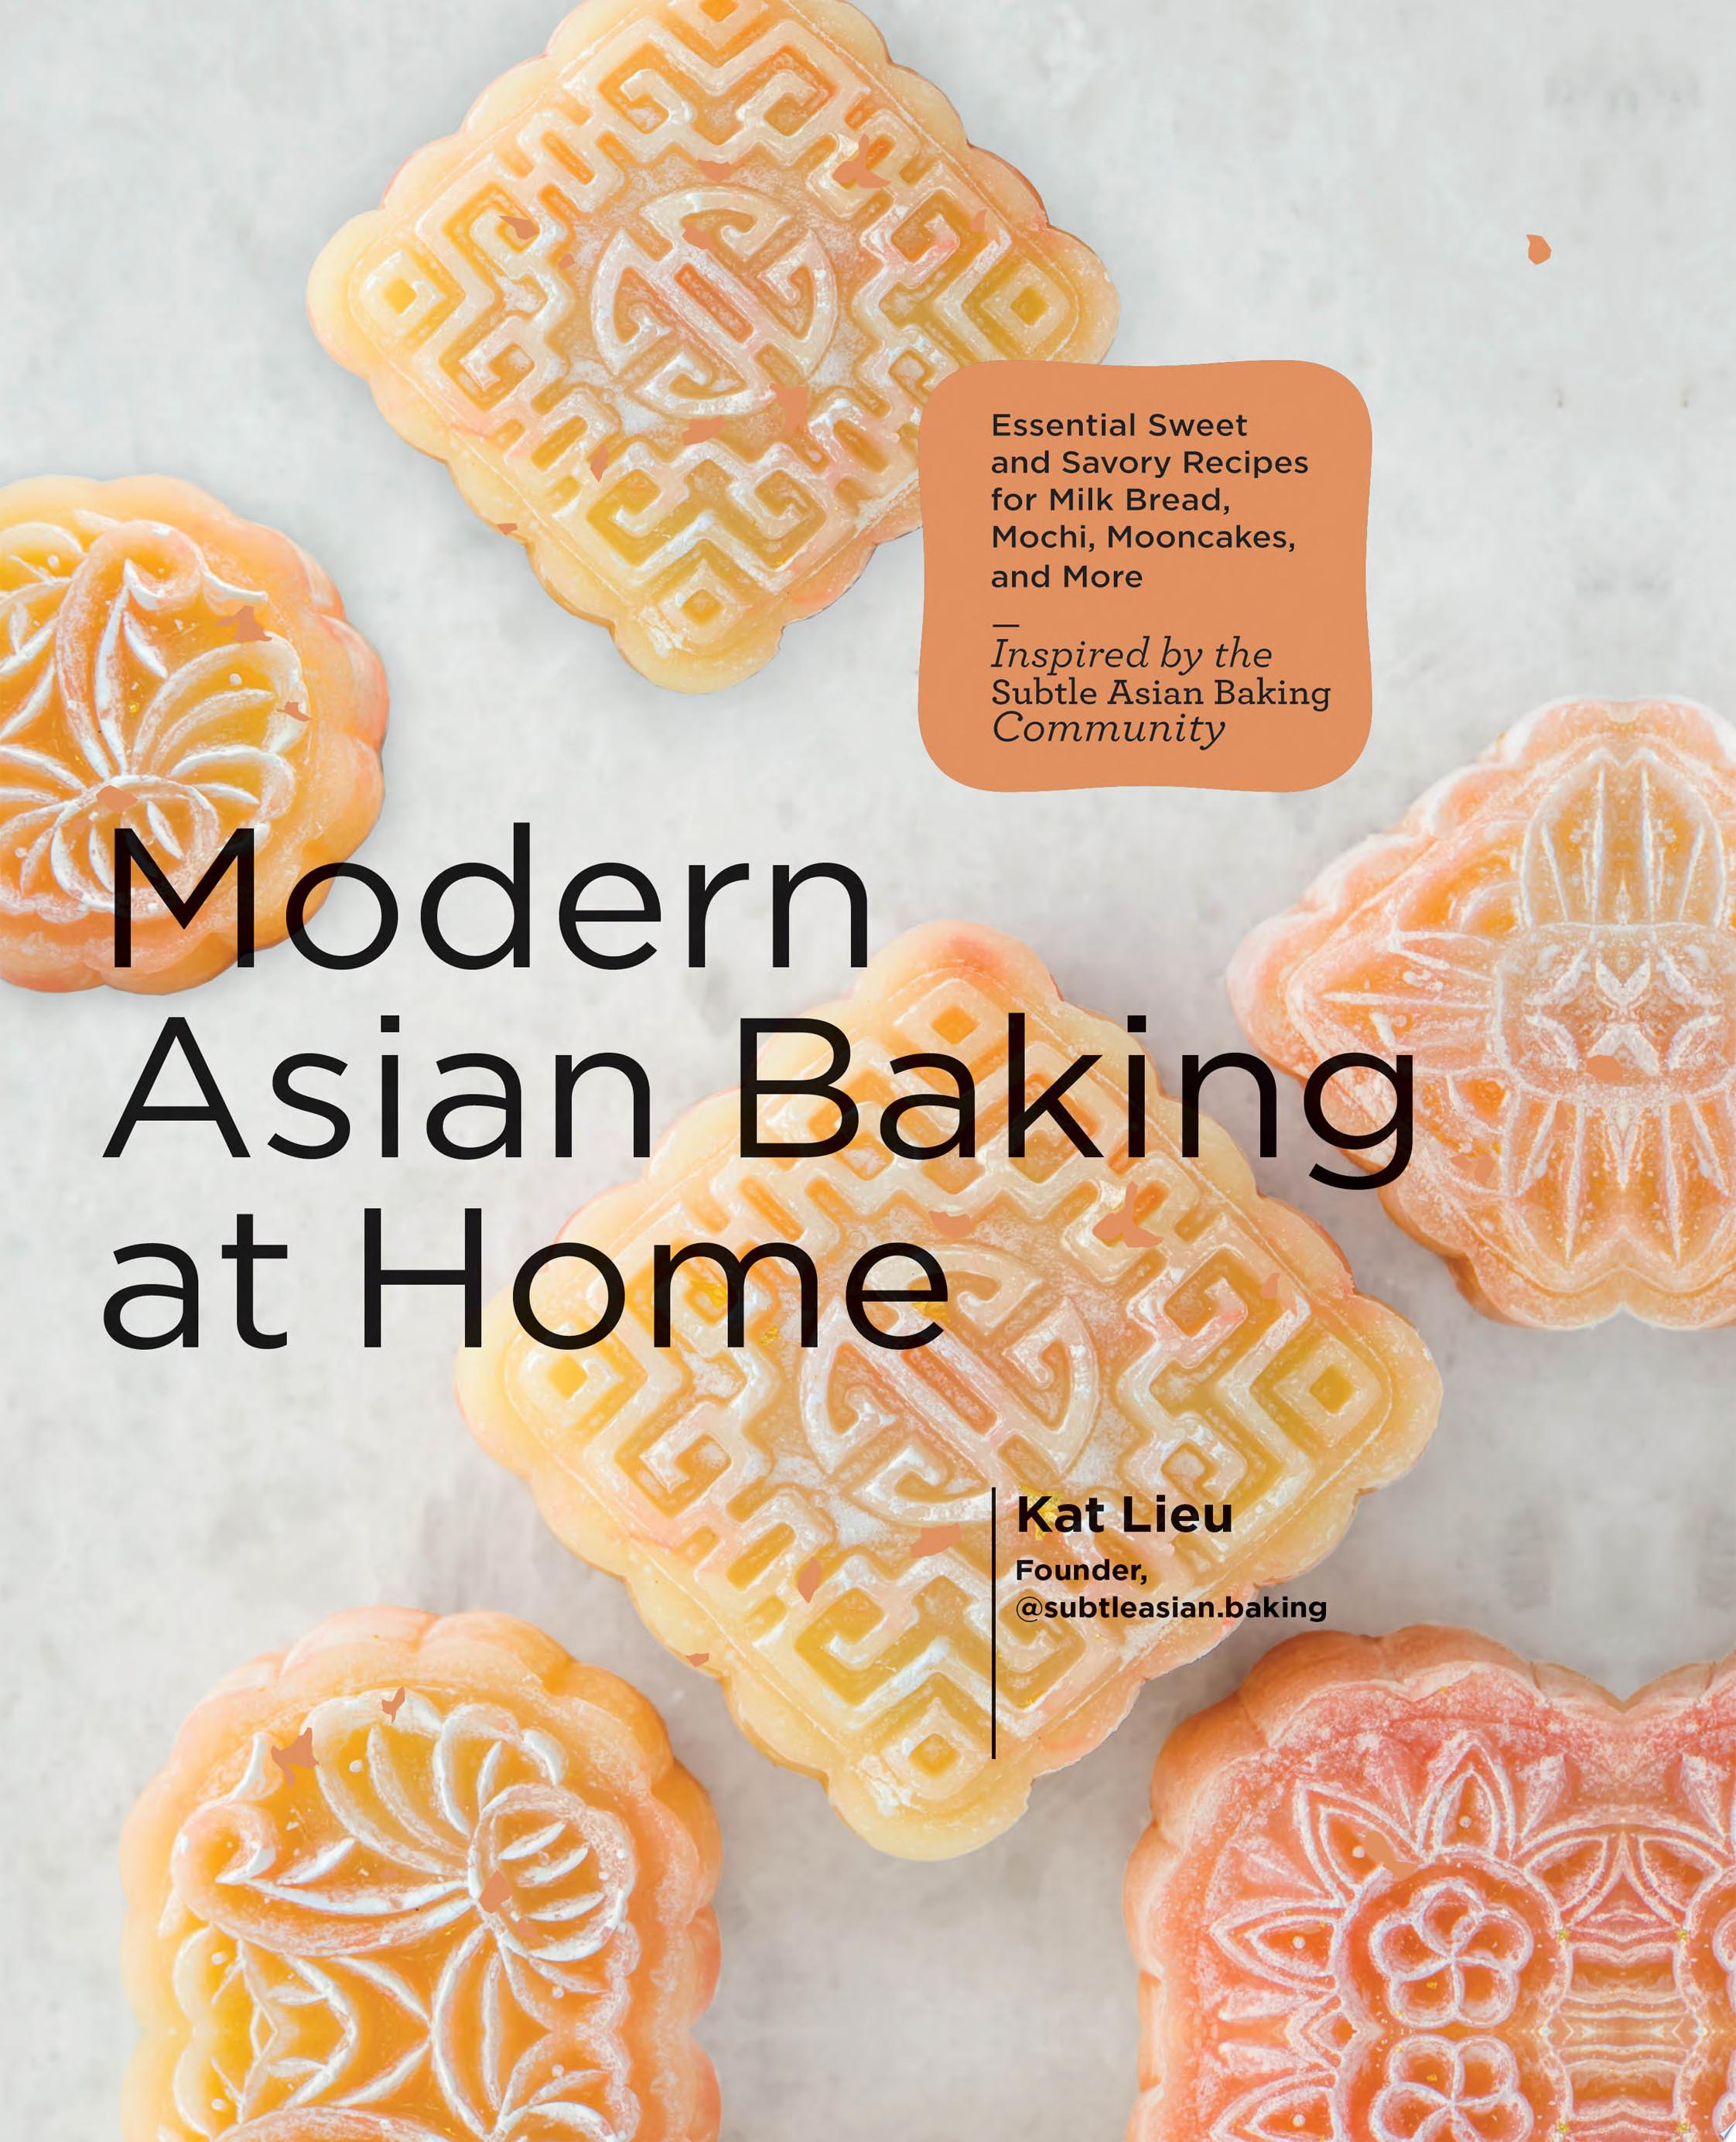 Image for "Modern Asian Baking at Home"